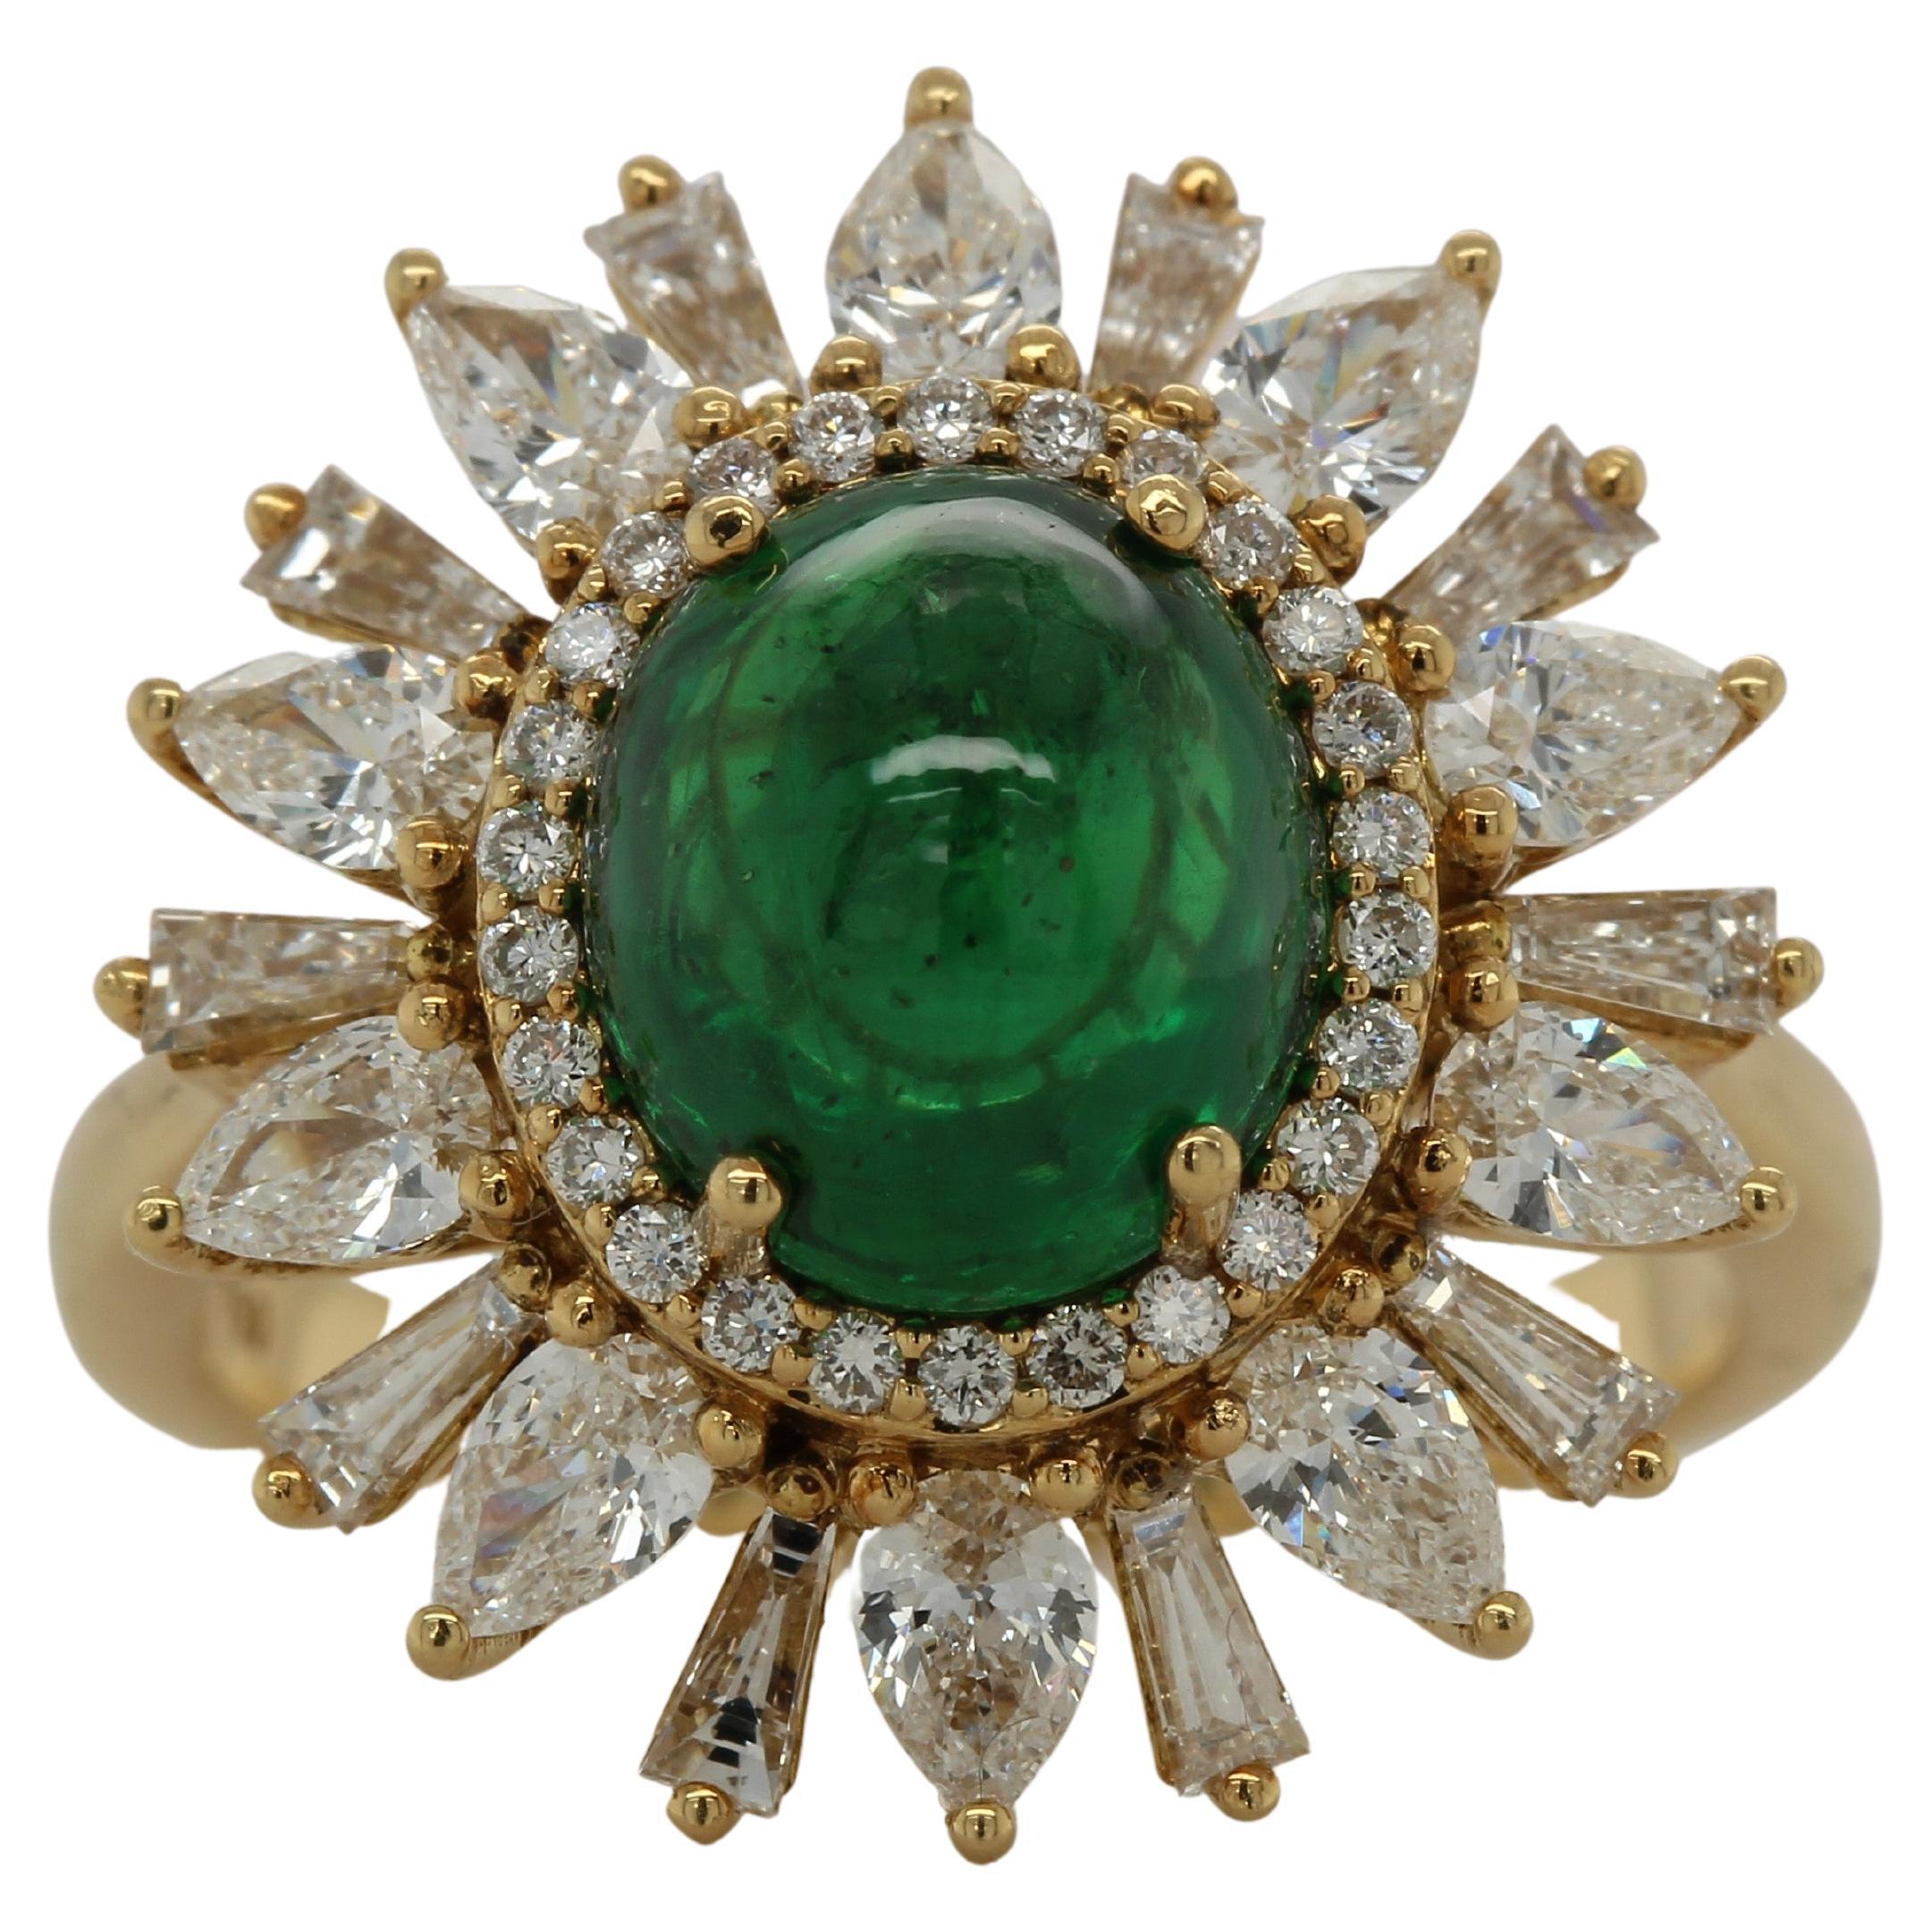 This mesmerizing 4.23 carat oval tsavorite and diamond ring is the perfect symbol of elegance and simplicity at its finest. The tsavorite is set with 0.16 carats of white round diamonds, white tapper 0.46 carats and white pear 1.04 carats, while a